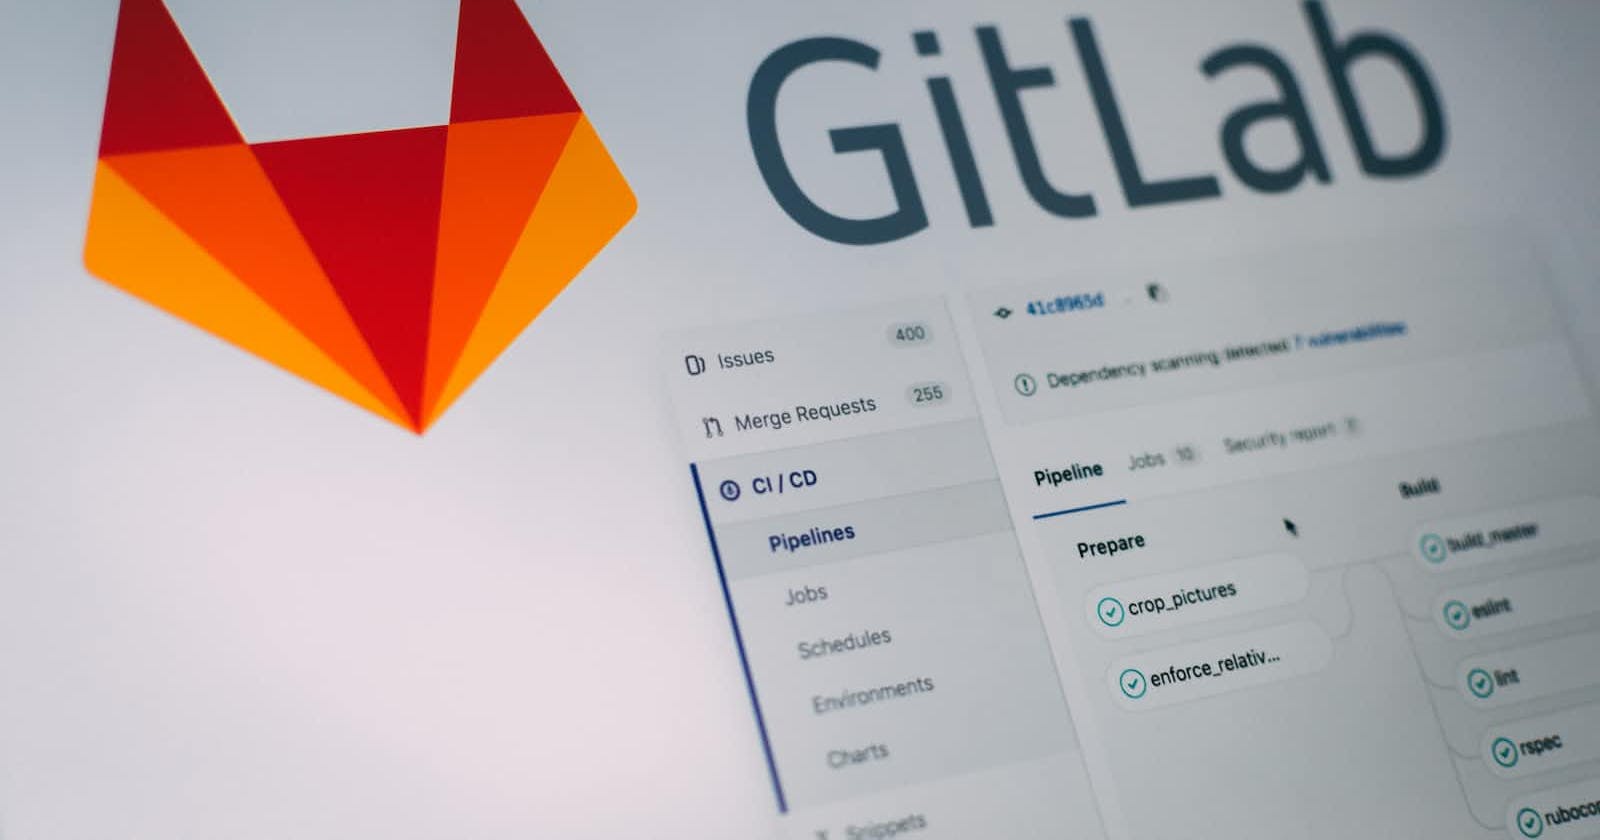 Setting Up GitLab On-Premise Using Docker in Just 7 Minutes